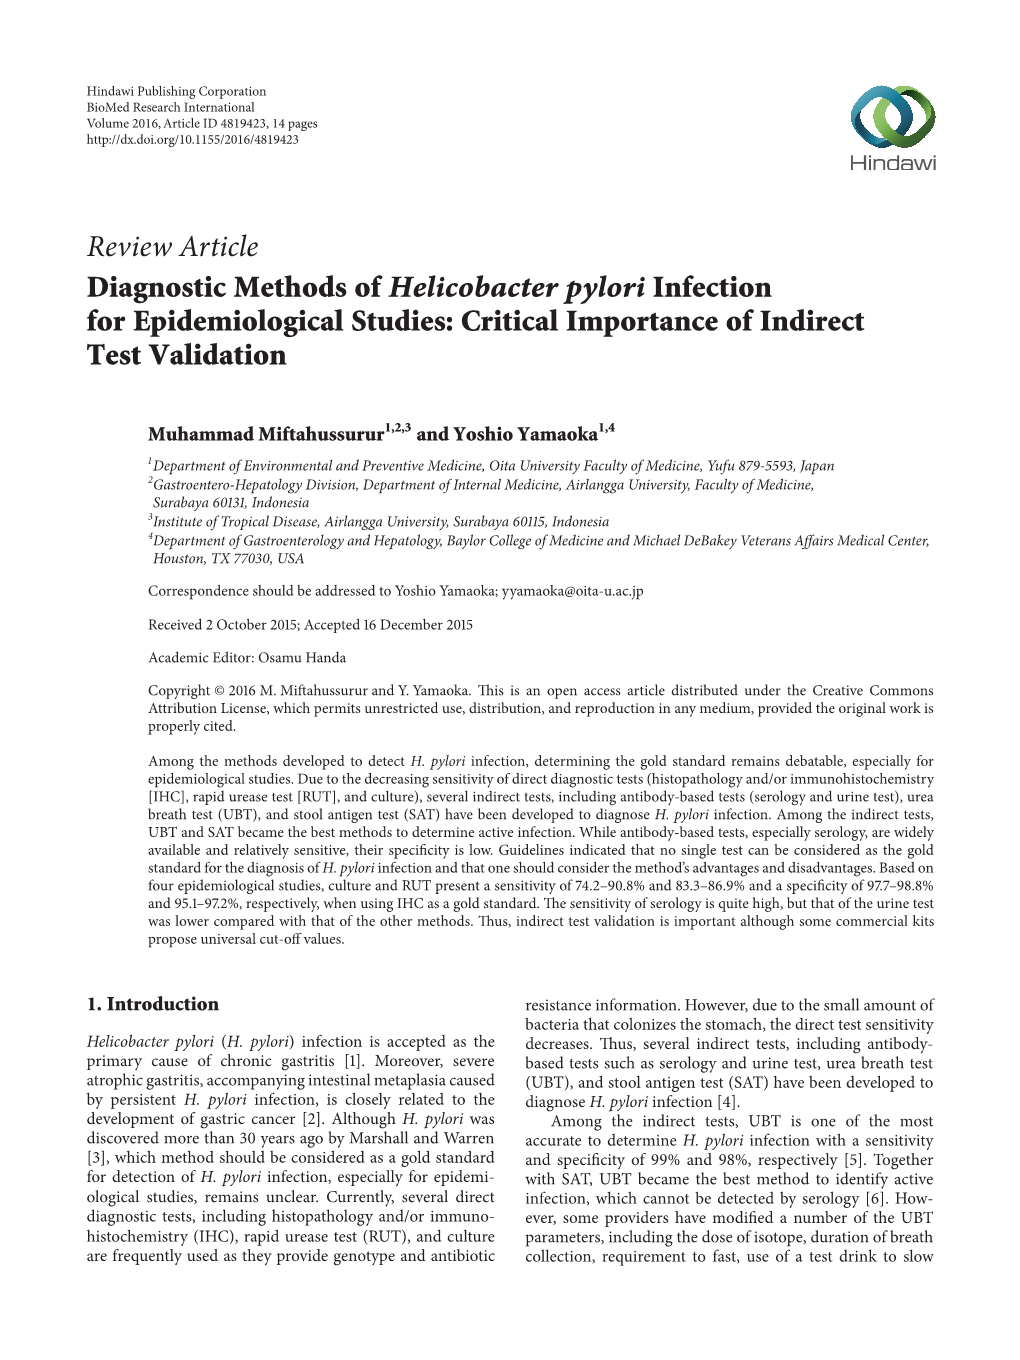 Review Article Diagnostic Methods of Helicobacter Pylori Infection for Epidemiological Studies: Critical Importance of Indirect Test Validation